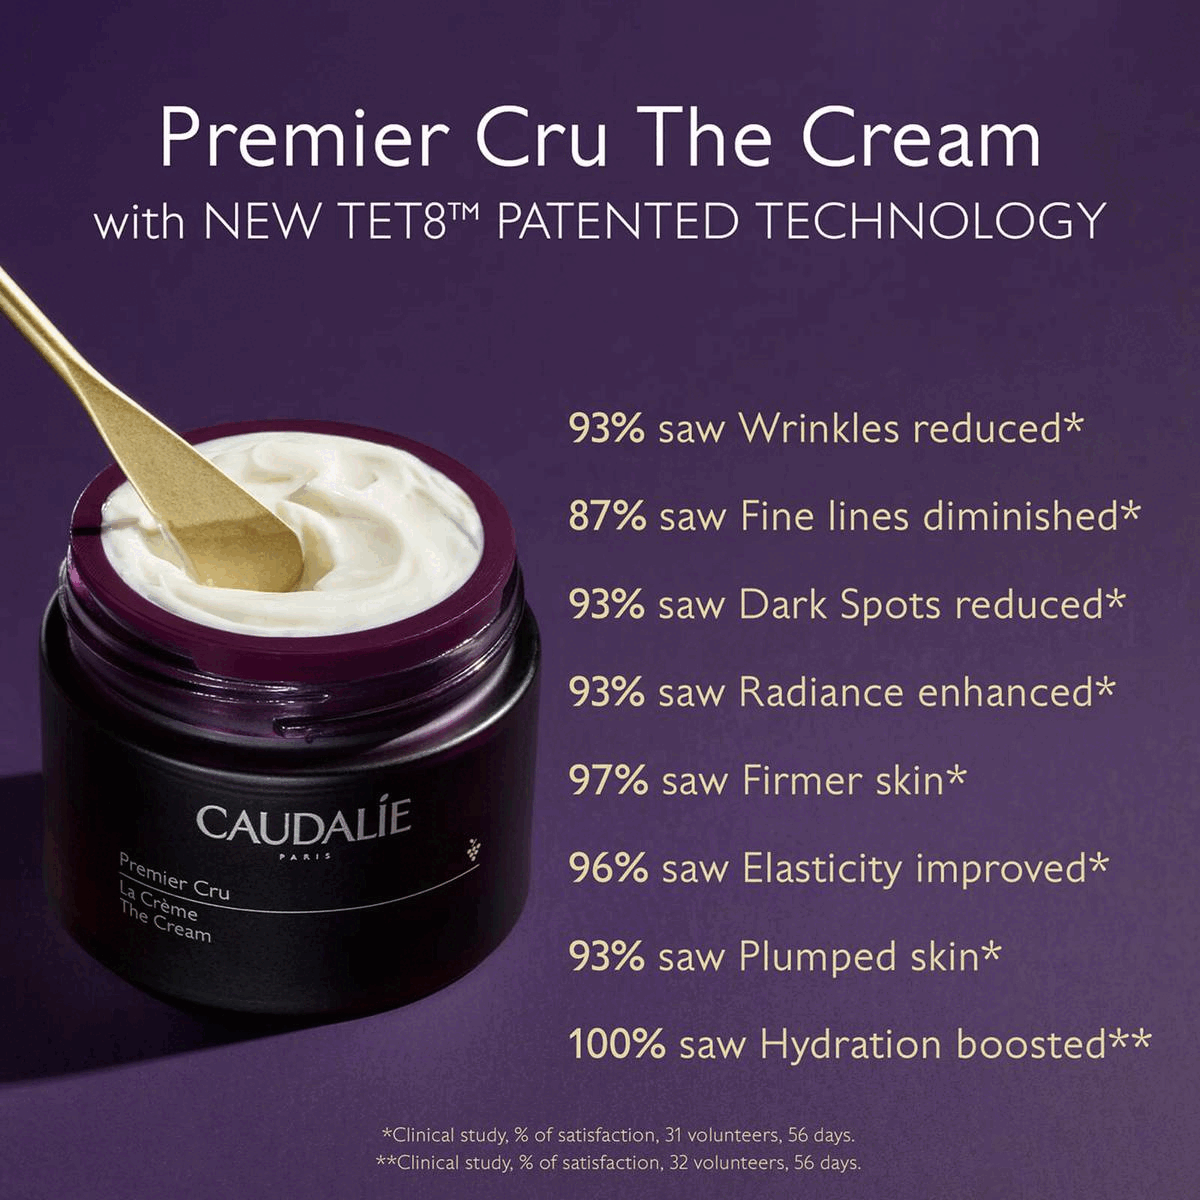 Image 1- Premier Cru The Cream with NEW TETSTM PATENTED TECHNOLOGY 93% saw Wrinkles reduced* 87% saw Fine lines diminished* 93% saw Dark Spots reduced* 93% saw Radiance enhanced* 97% saw Firmer skin* 93% saw Plumped skin* 100% saw Hydration boosted** *Clinical study, % of satisfaction, 31 volunteers, 56 days, **Clinical study, % of satisfaction, 32 volunteers, 56 days. Image 2- Premier Cru The Cream Target 8 Signs of Aging Improve Dark Spots & Radiance Reduce Fine Lines & Wrinkles Plump & Hydrate Improve, Firmness & Elasticity